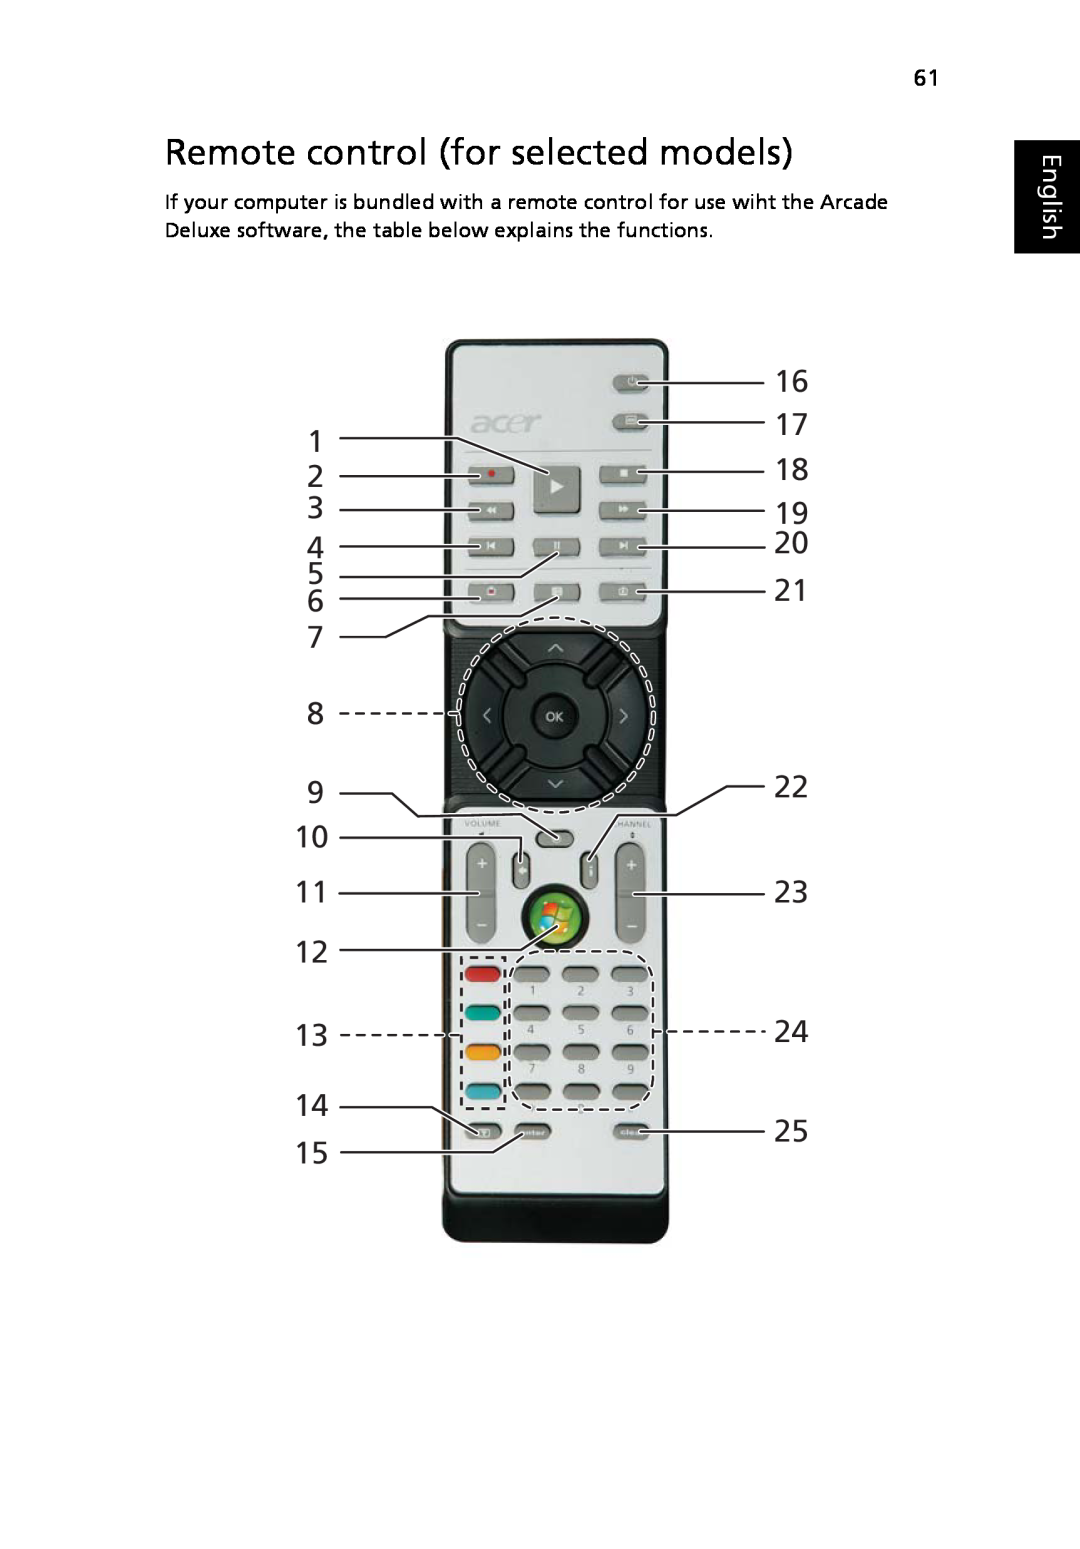 Acer 5520G, 5220 manual Remote control for selected models, English 